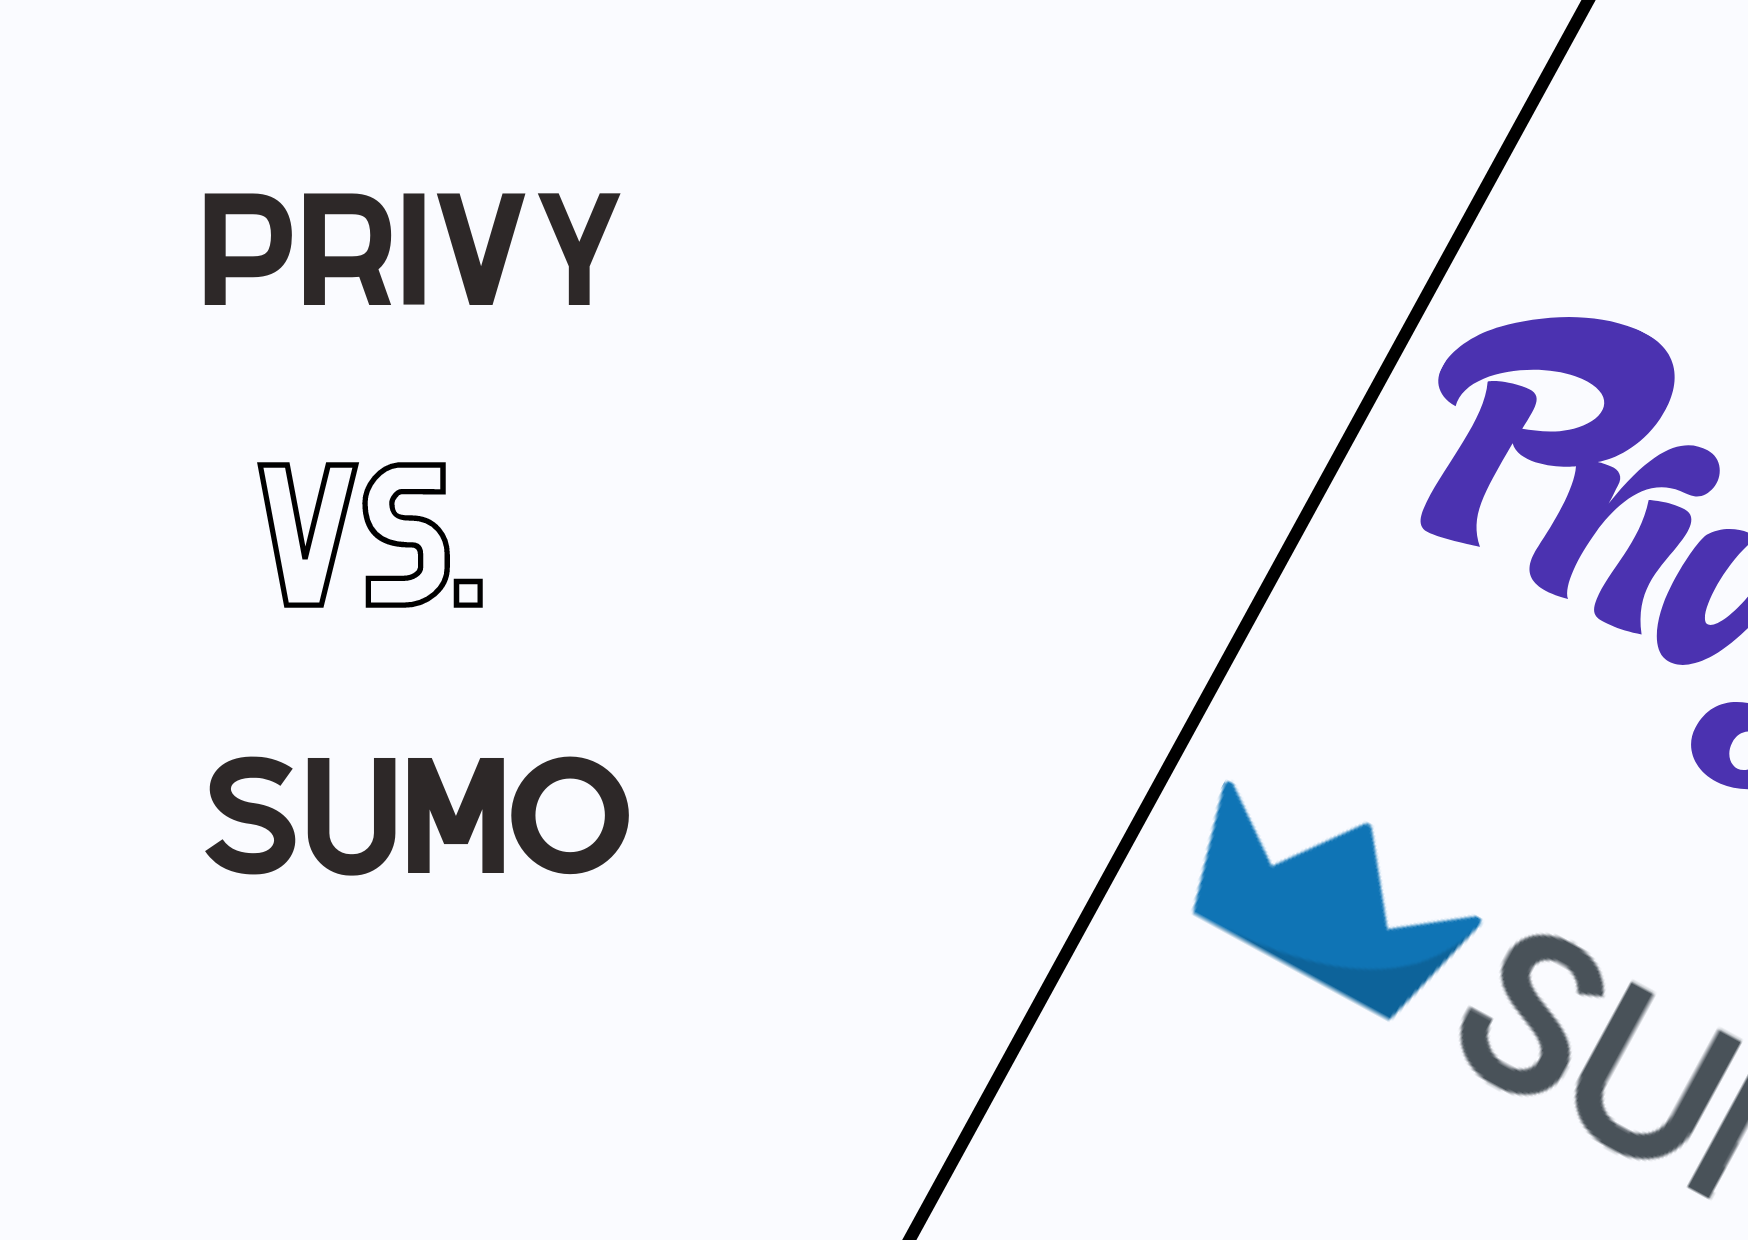 the Privy and Sumo comparison as the banner